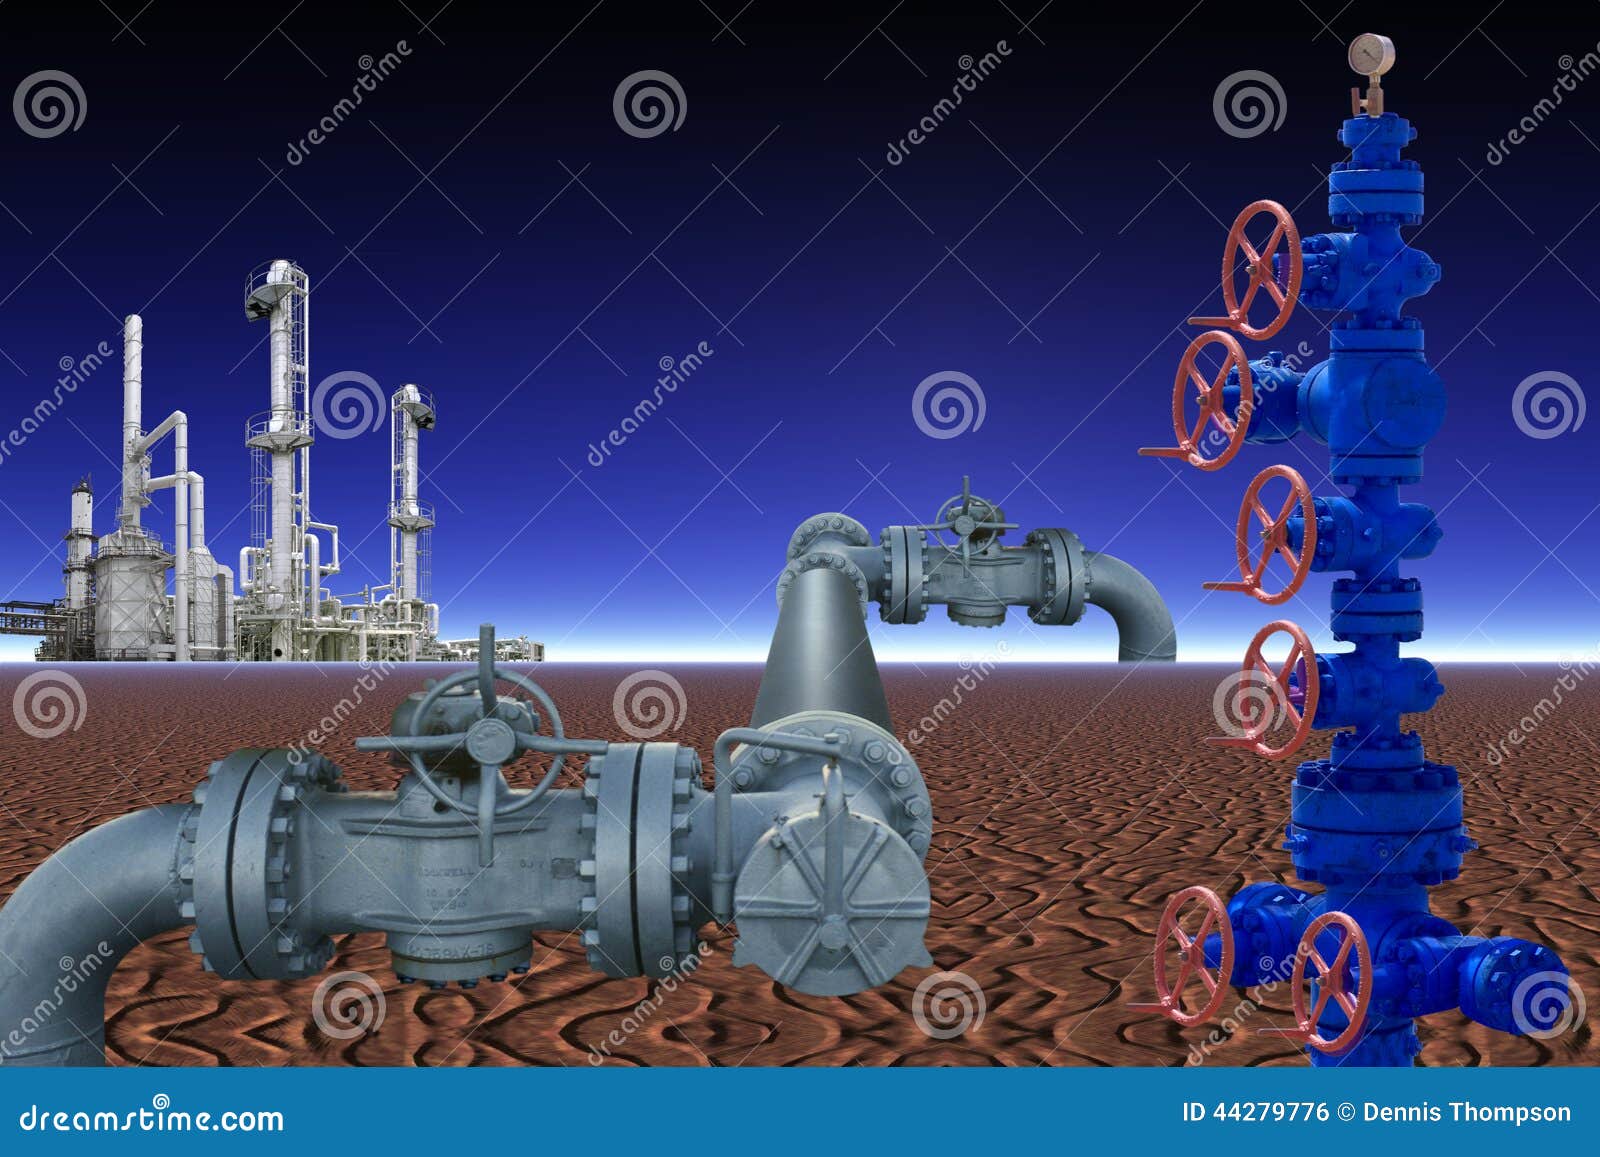 oil gas industry energy power oilfield drilling rig oil pump refining pipeline technology industry pump jack background